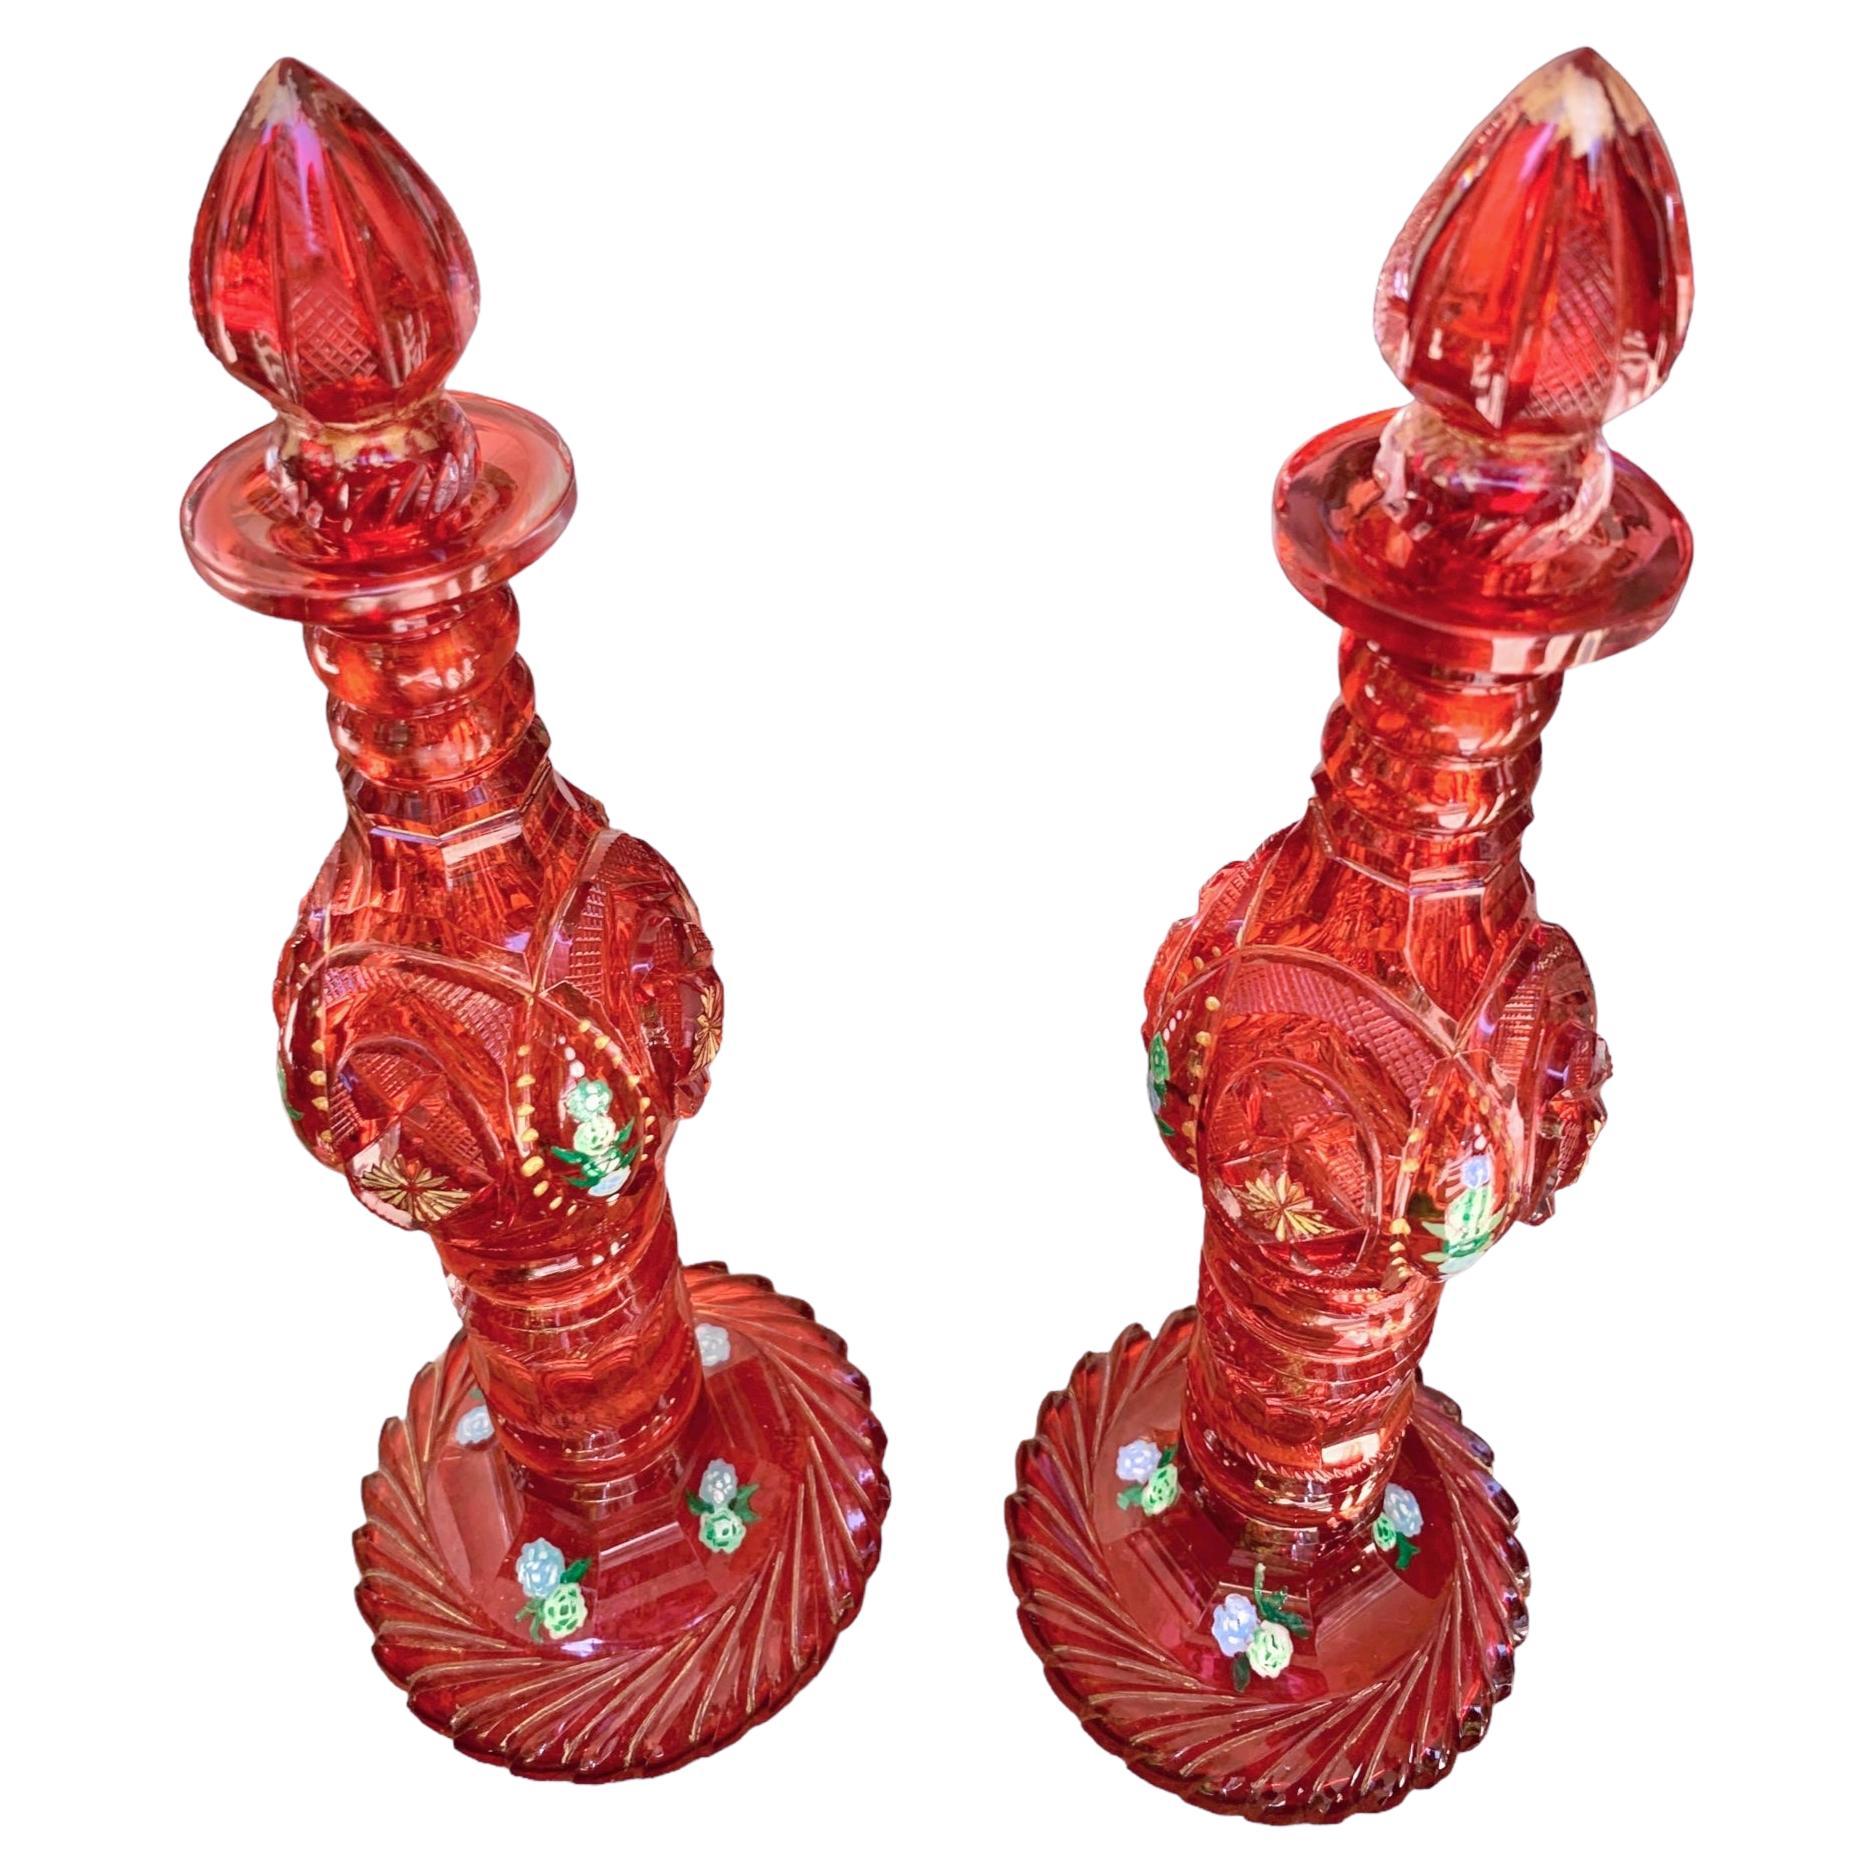 Antique Pair of Bohemian Cranberry Crystal Glass Decanters, 19th Century 1